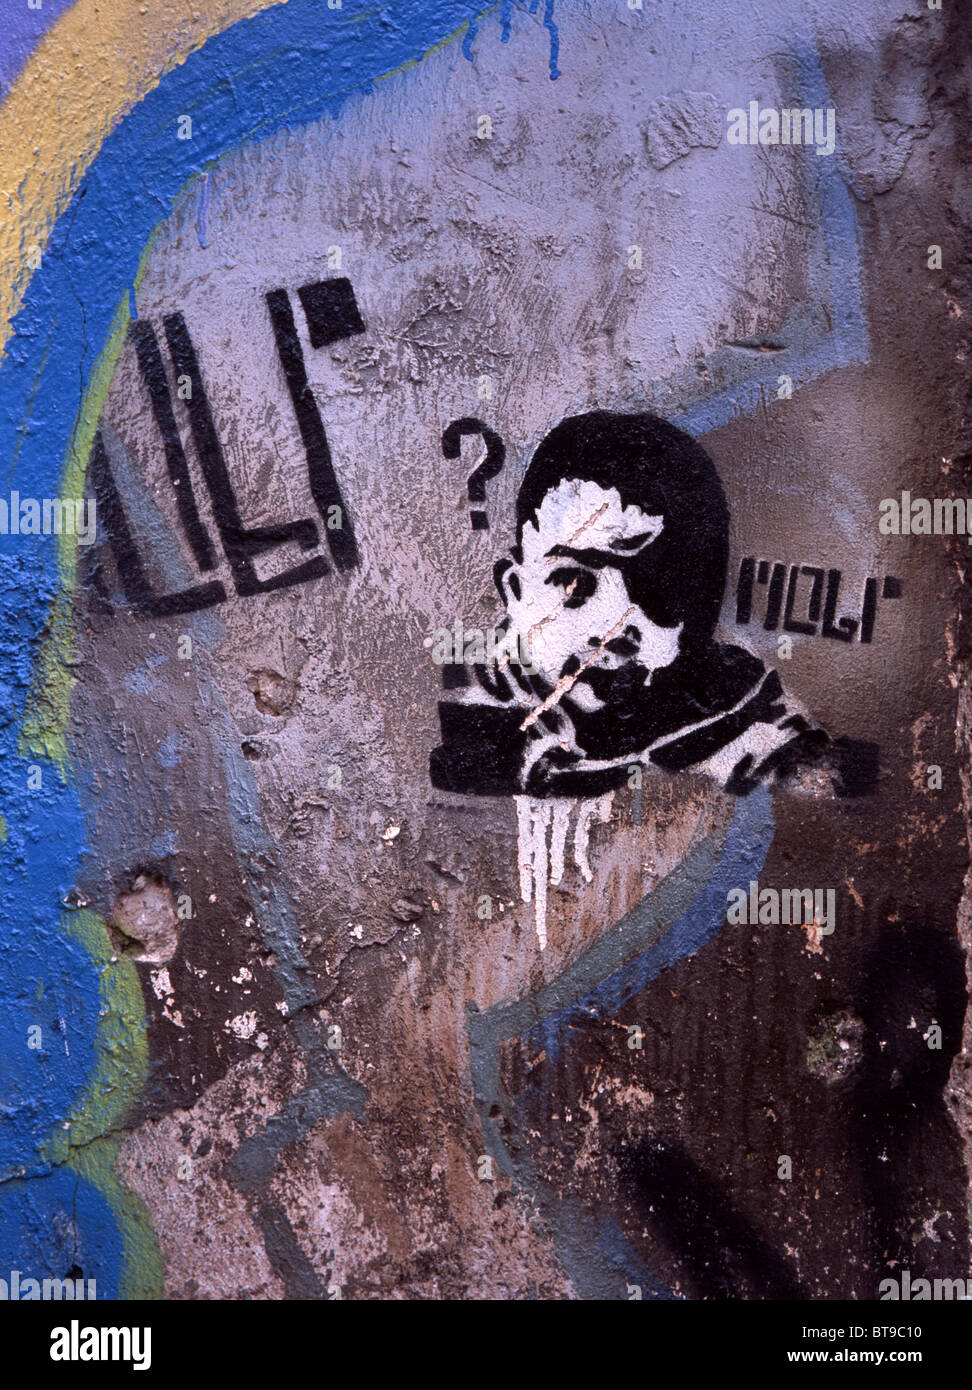 Graffito |stencil} in Athens showing a male head with eye patch looking at a close by question mark, Greece Stock Photo